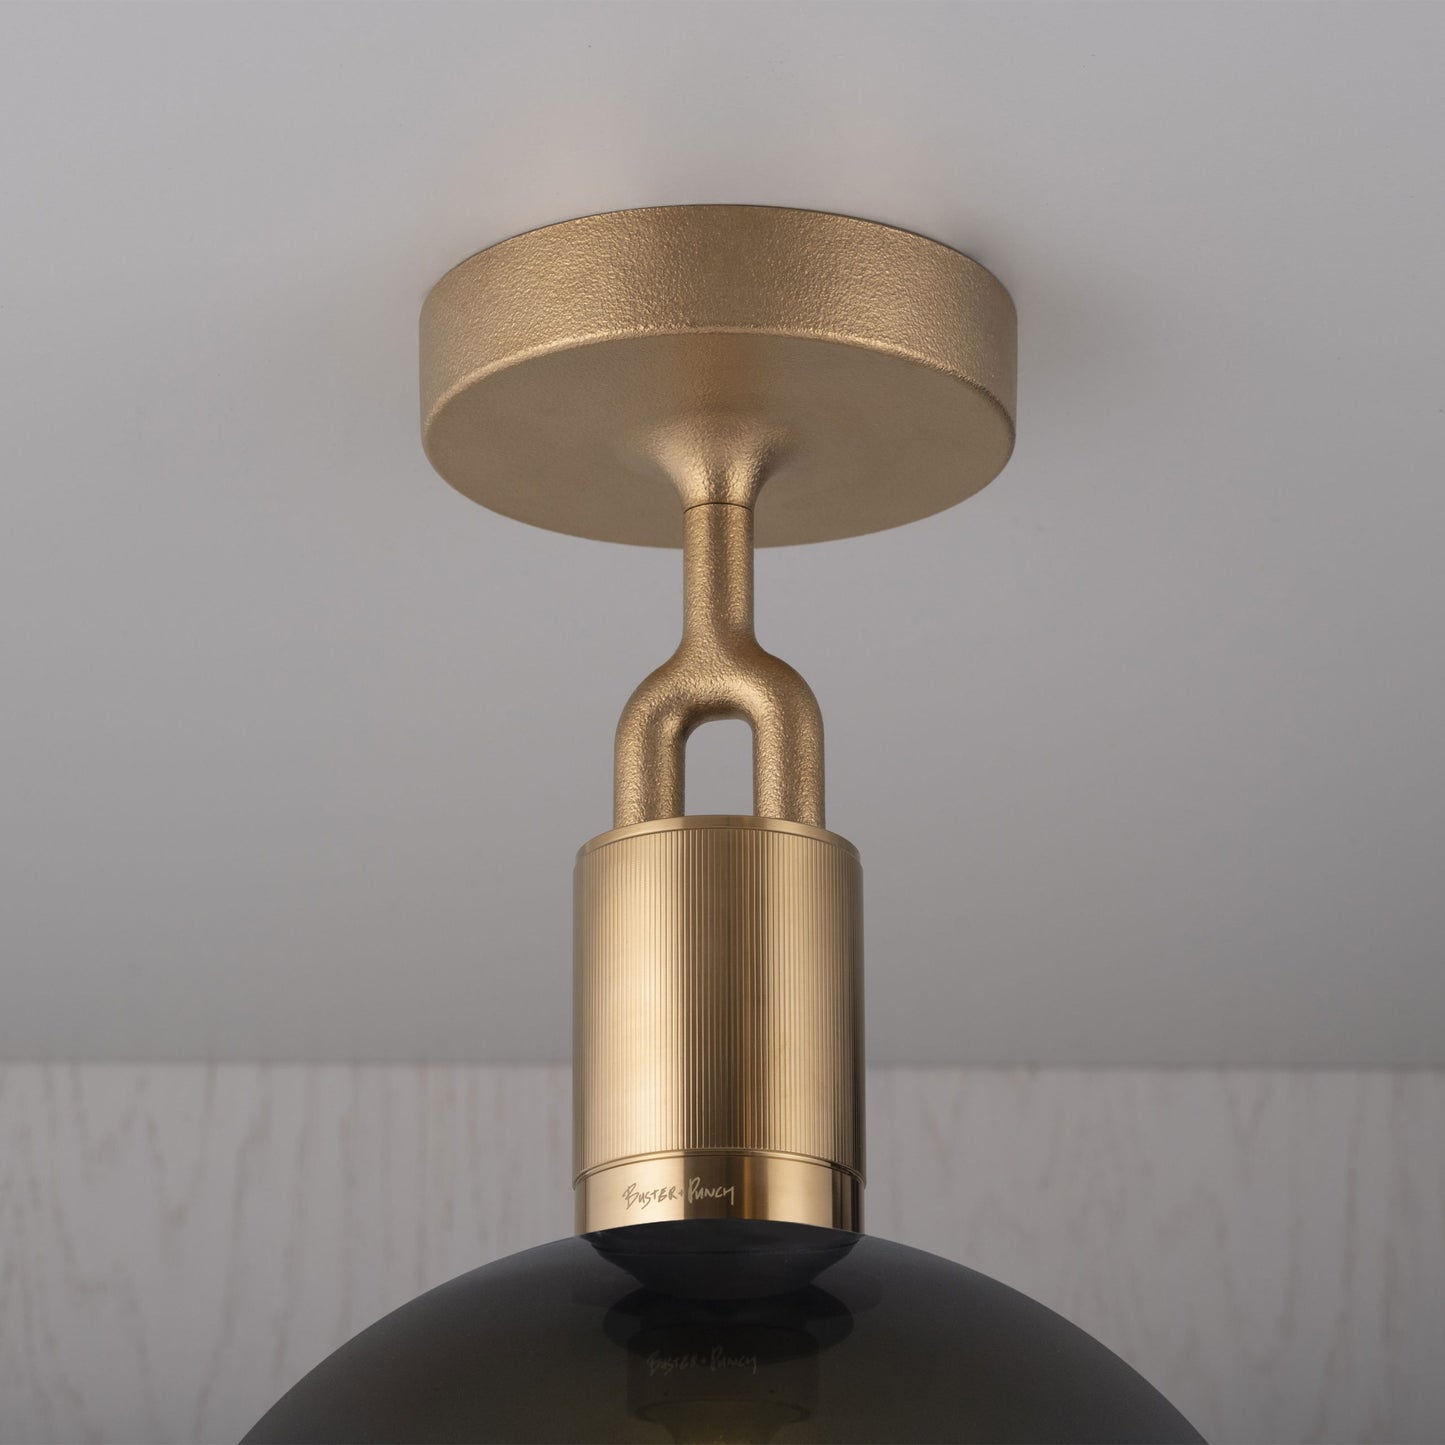 Forked Ceiling Light / Globe / Smoked / Large brass, detailed close up view of fork and fitting.